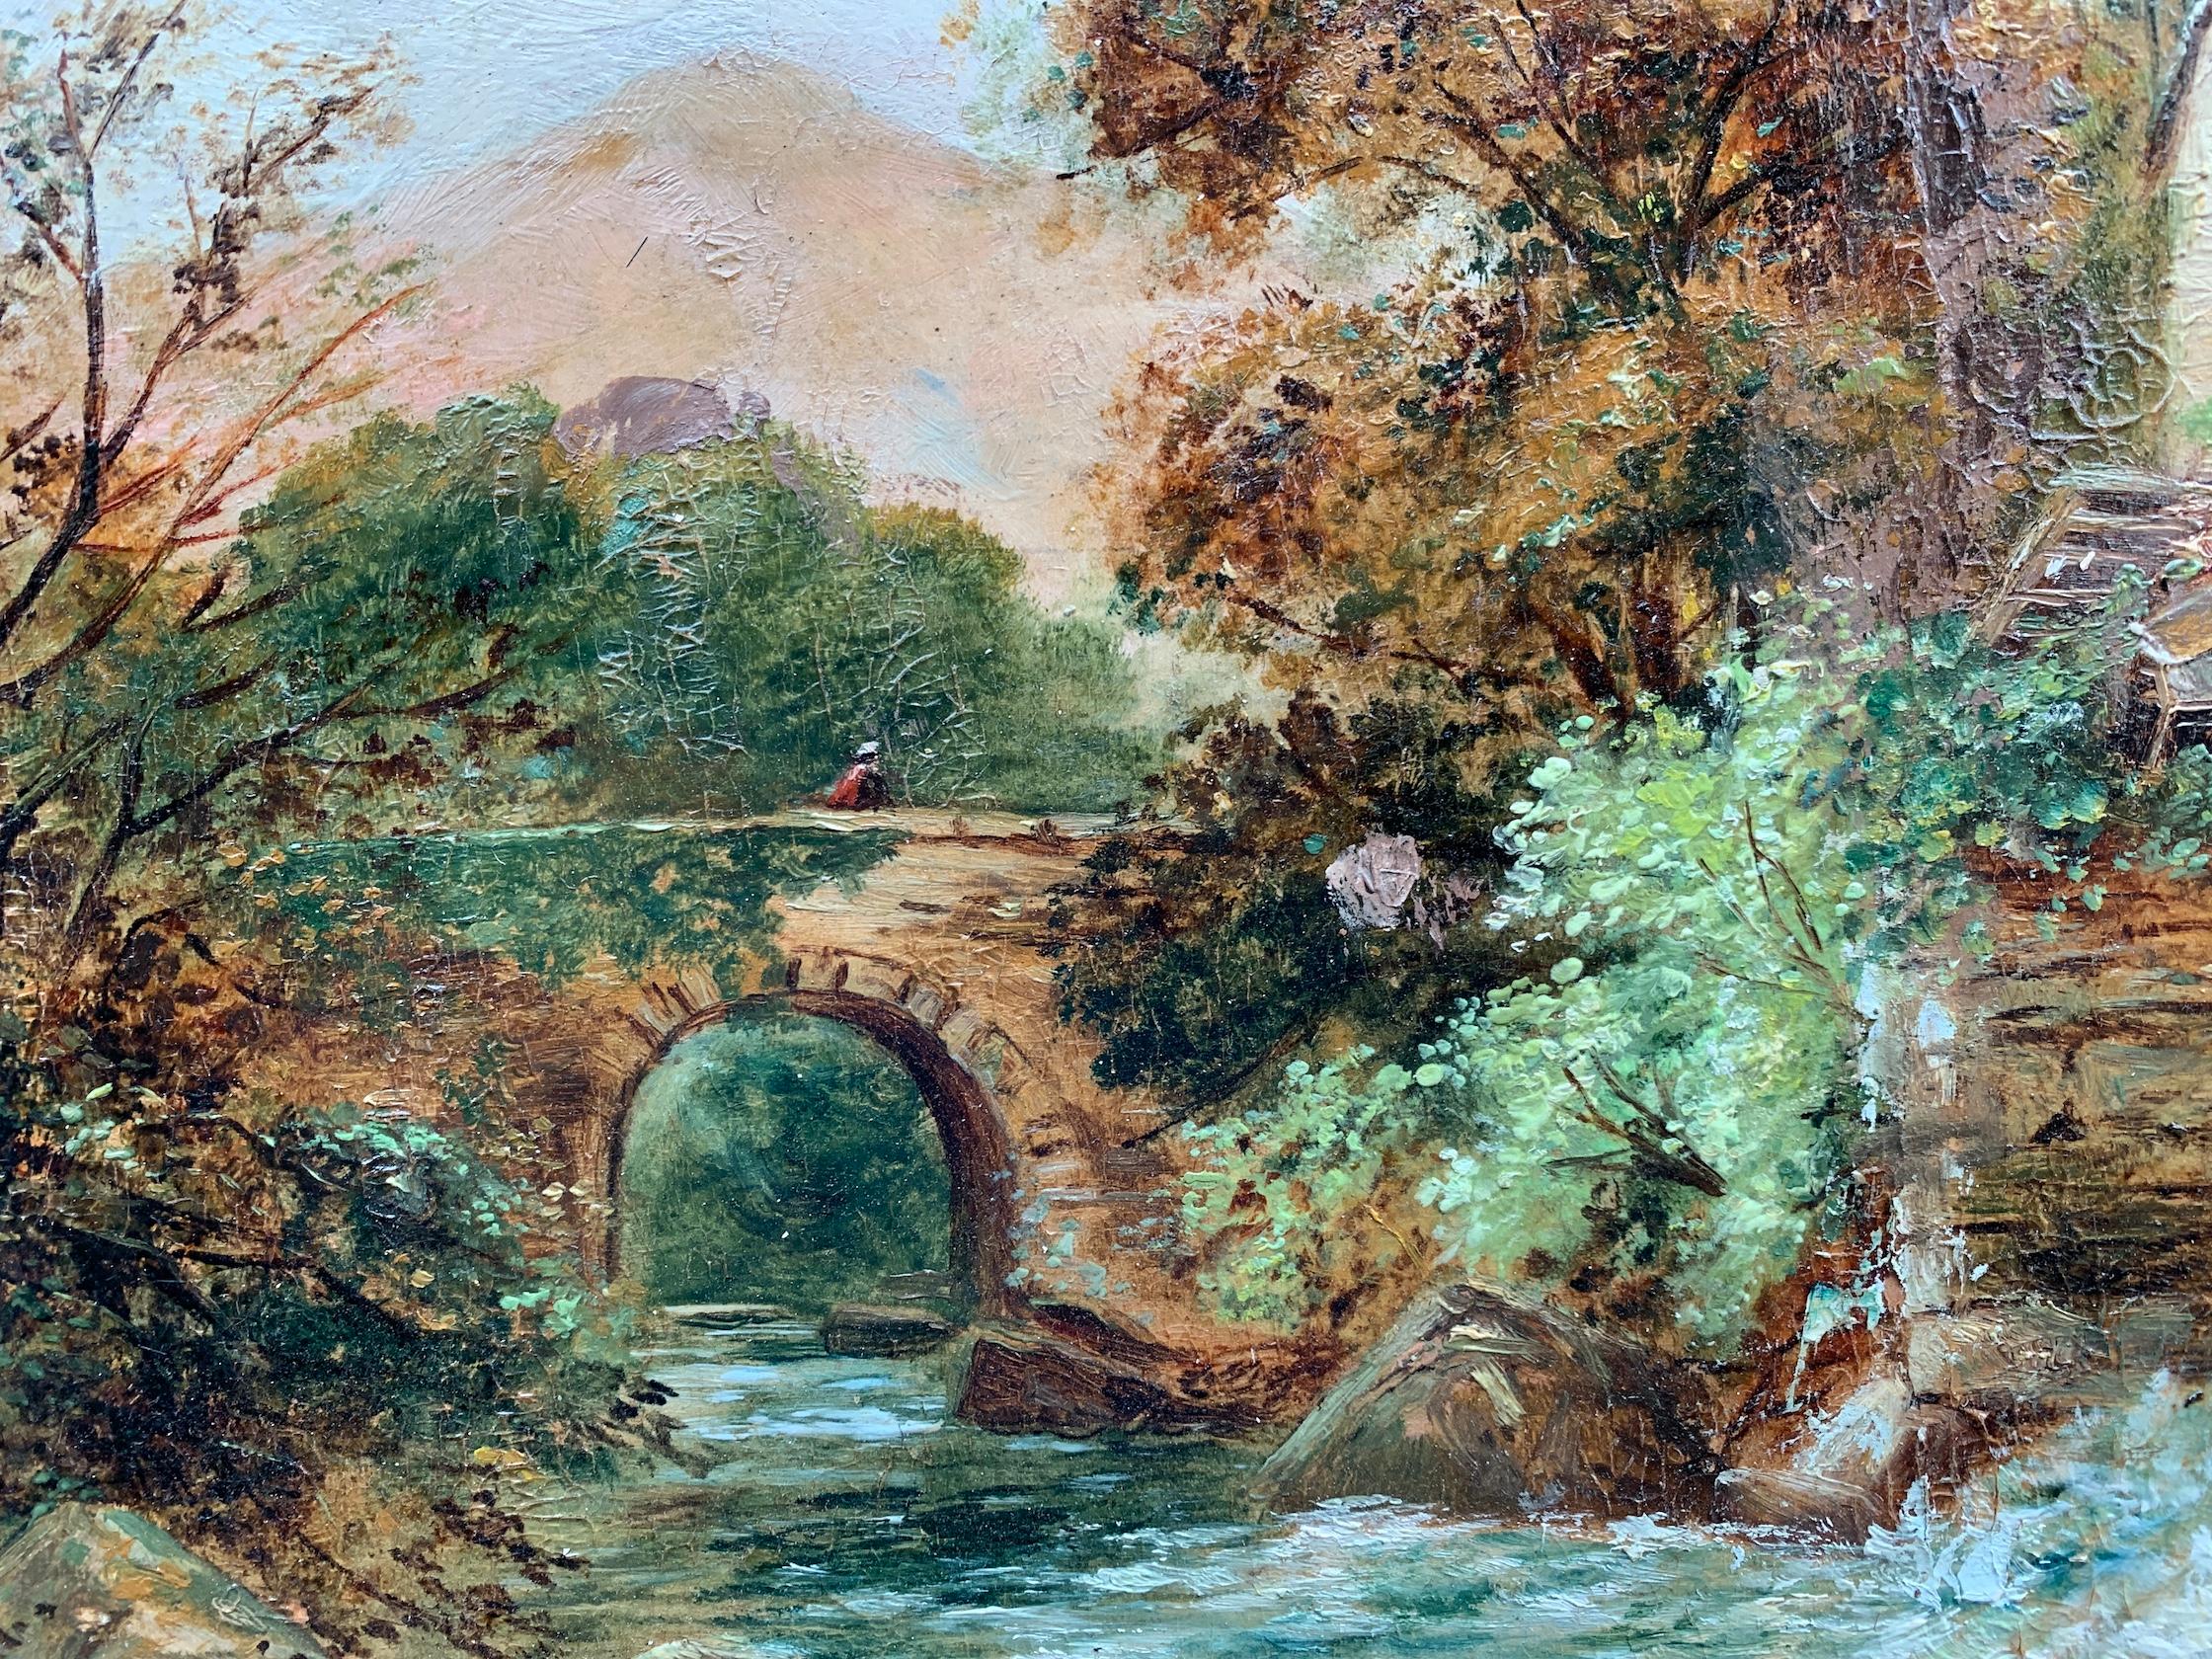 R.Ellis

English late 19th-century landscape of a Watermill by a Stream and a bridge.

Original frame

oils on card

Signed and dated on the reverse and lower right. 

Ellis was a landscape painter active in England during the latter part of the